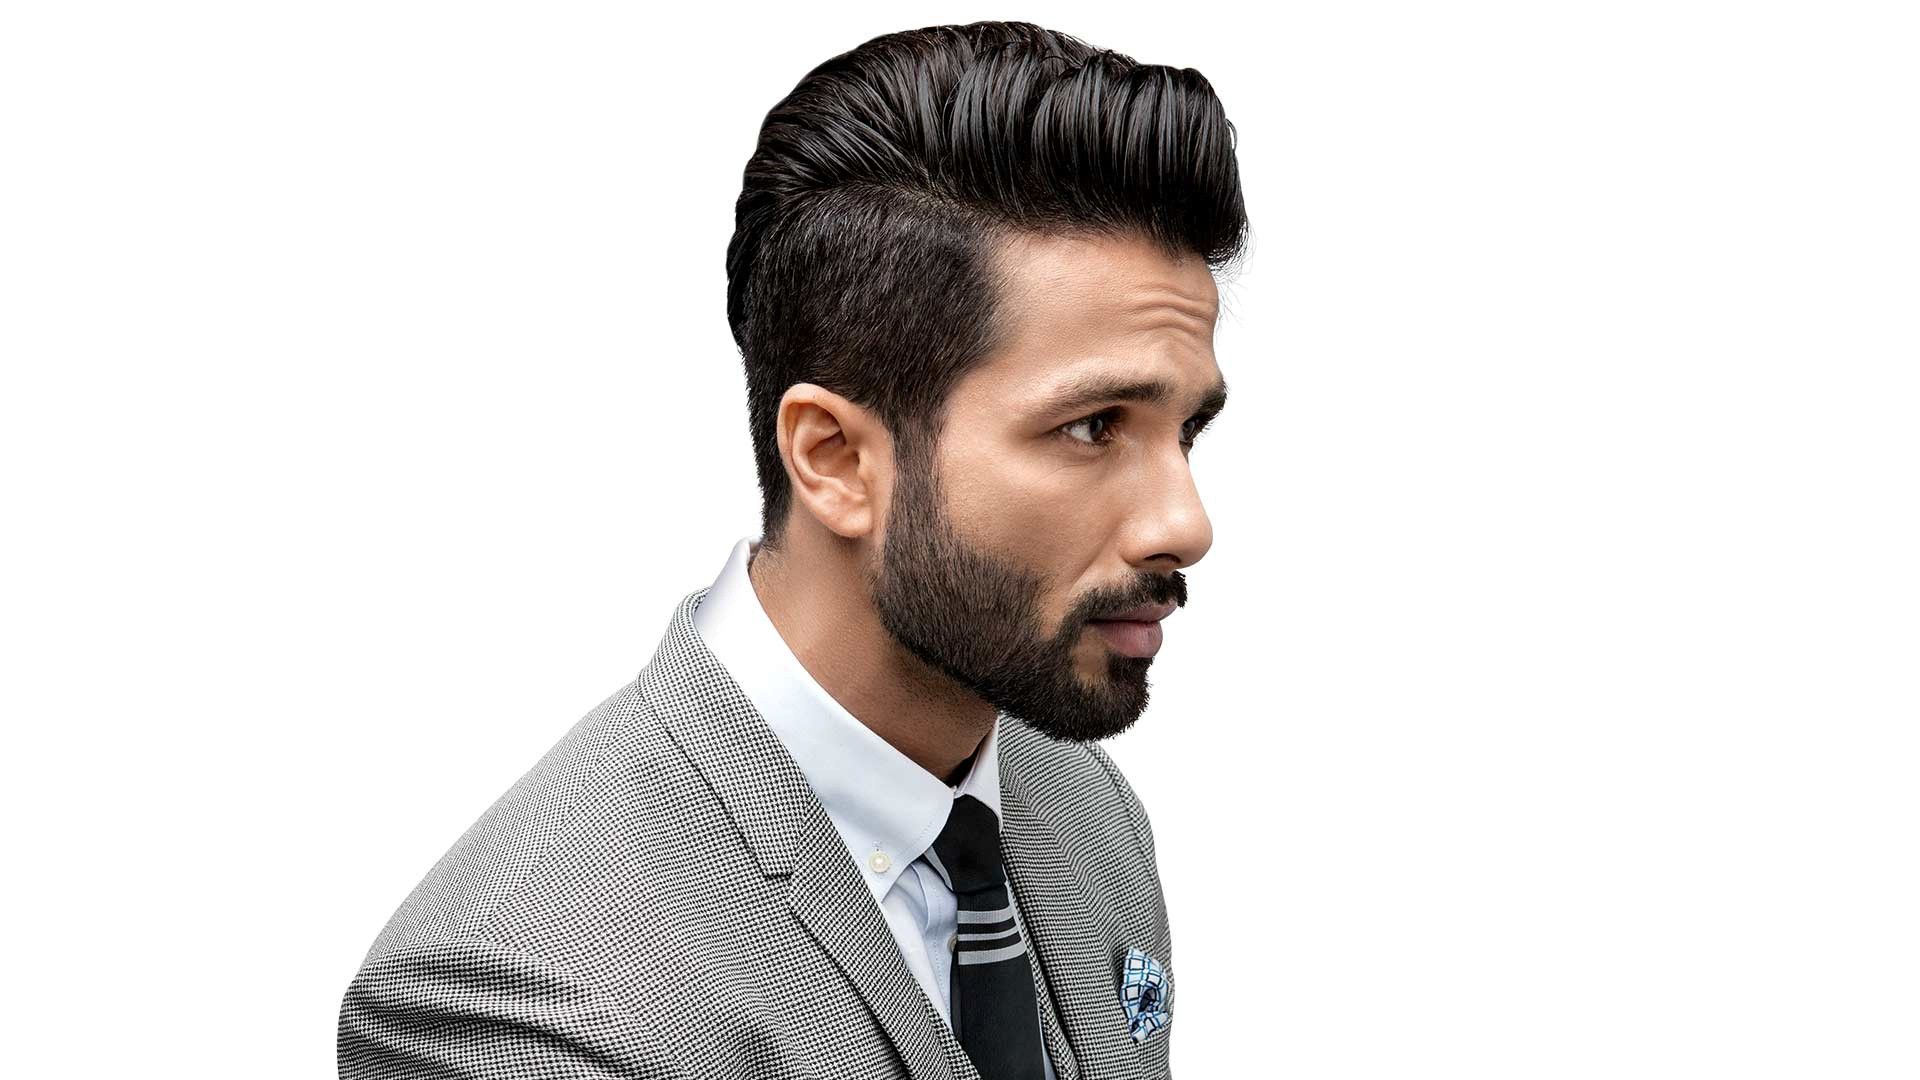 35 Shahid Kapoor Latest Images And Wallpapers Full Hd 1080p Fullhdwallpaper Net